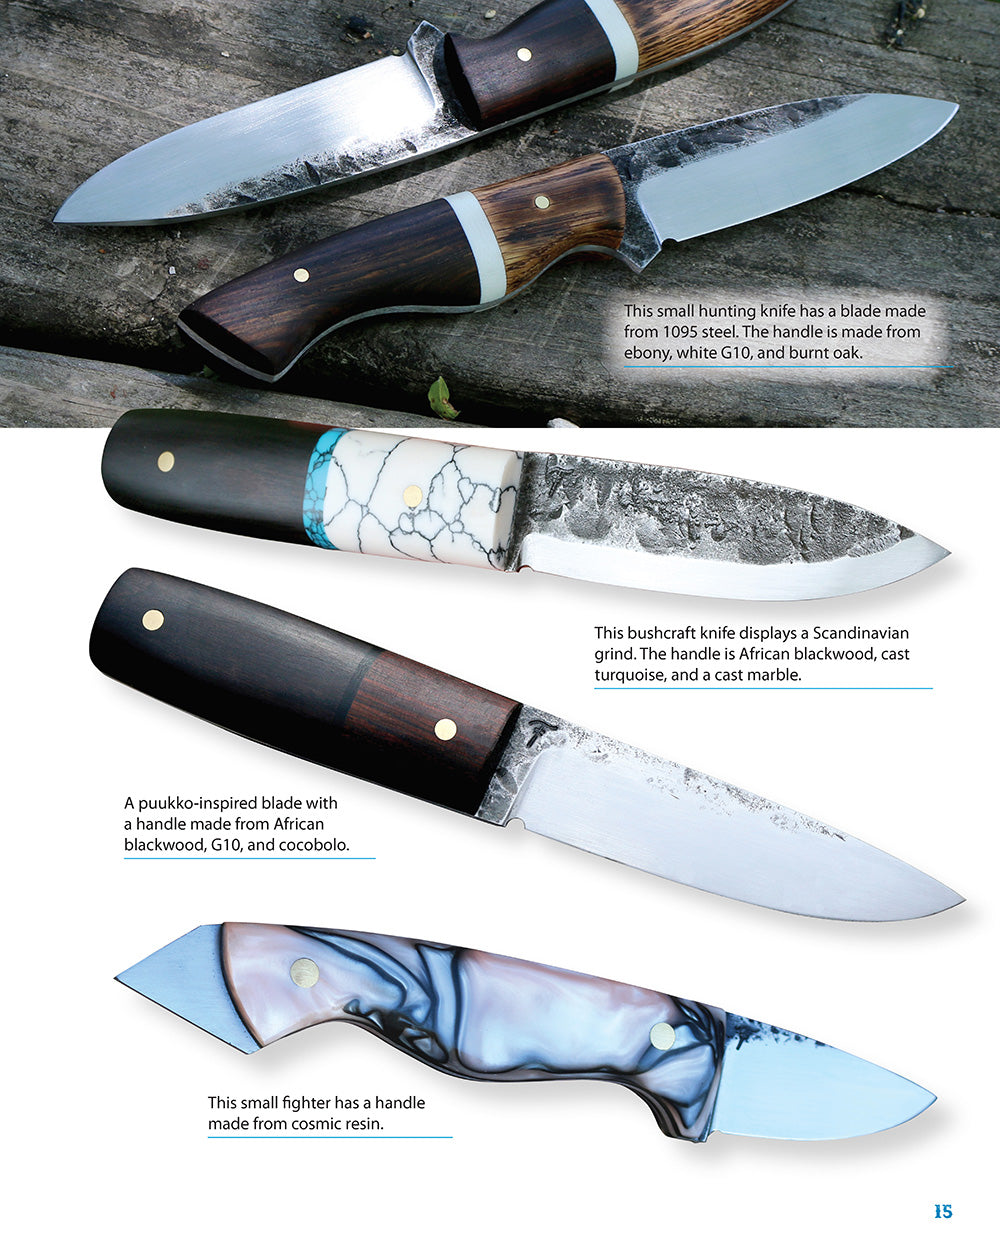 Making Your Own Bush Knife